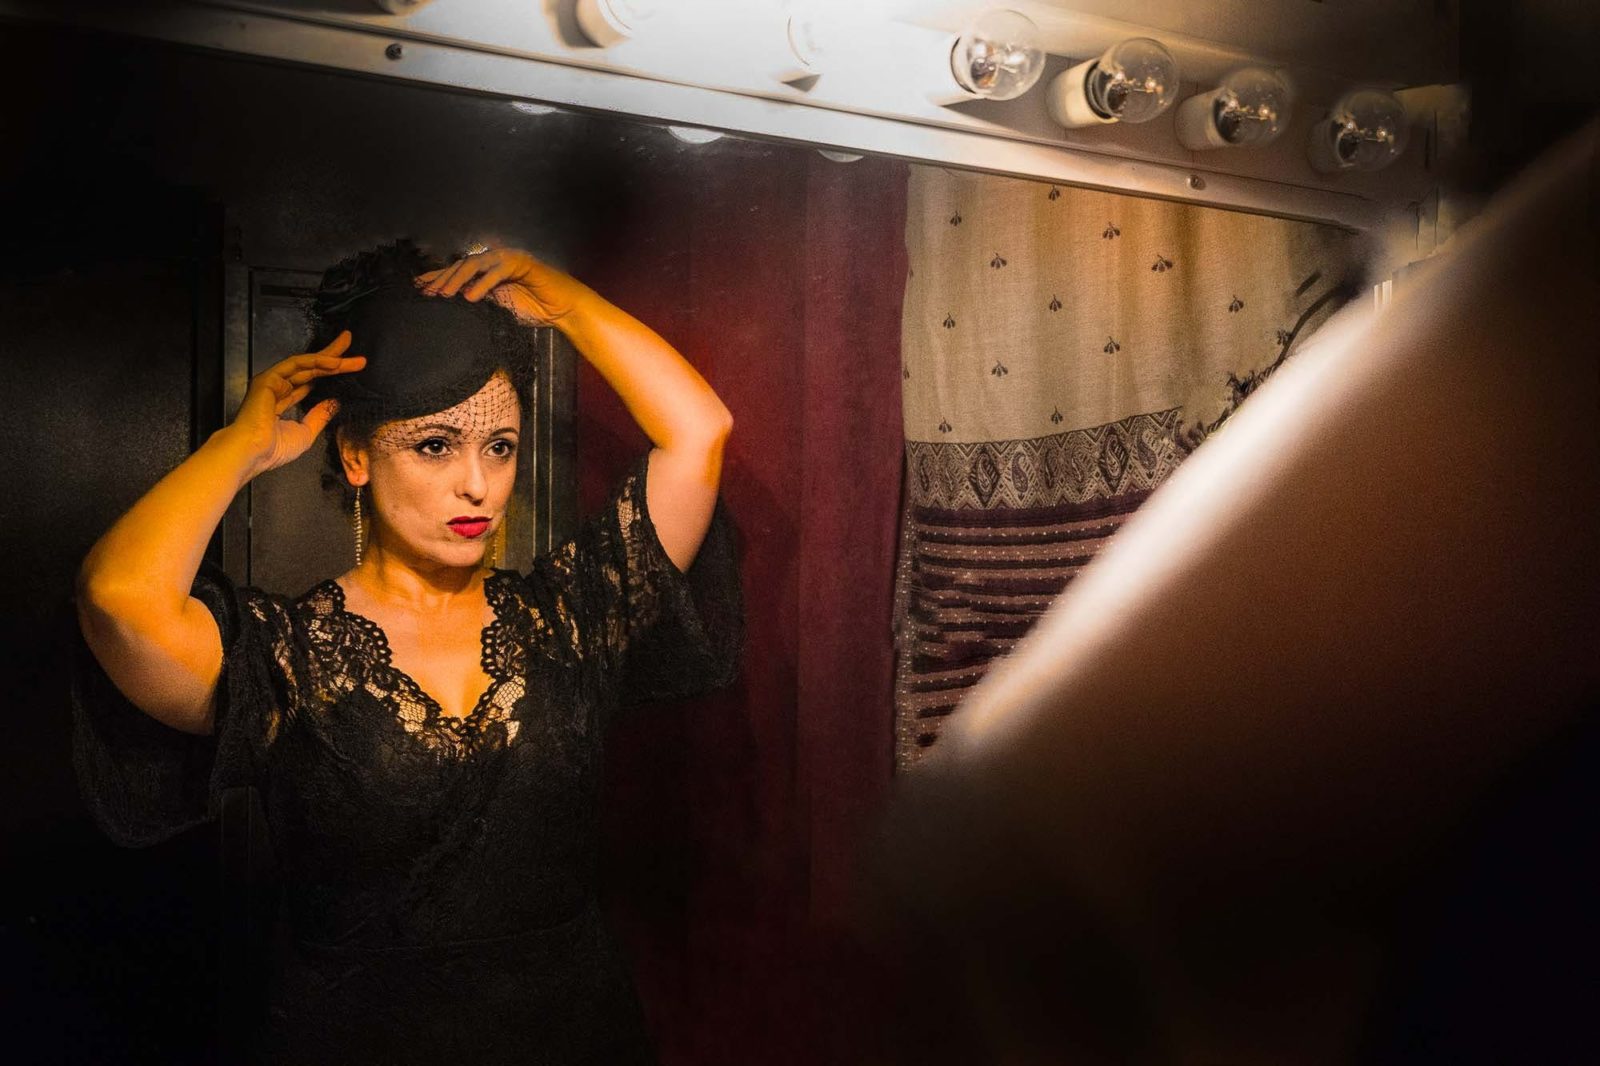 A person wearing red lipstick, a race day hat and black lace edged dress, stares into a mirror